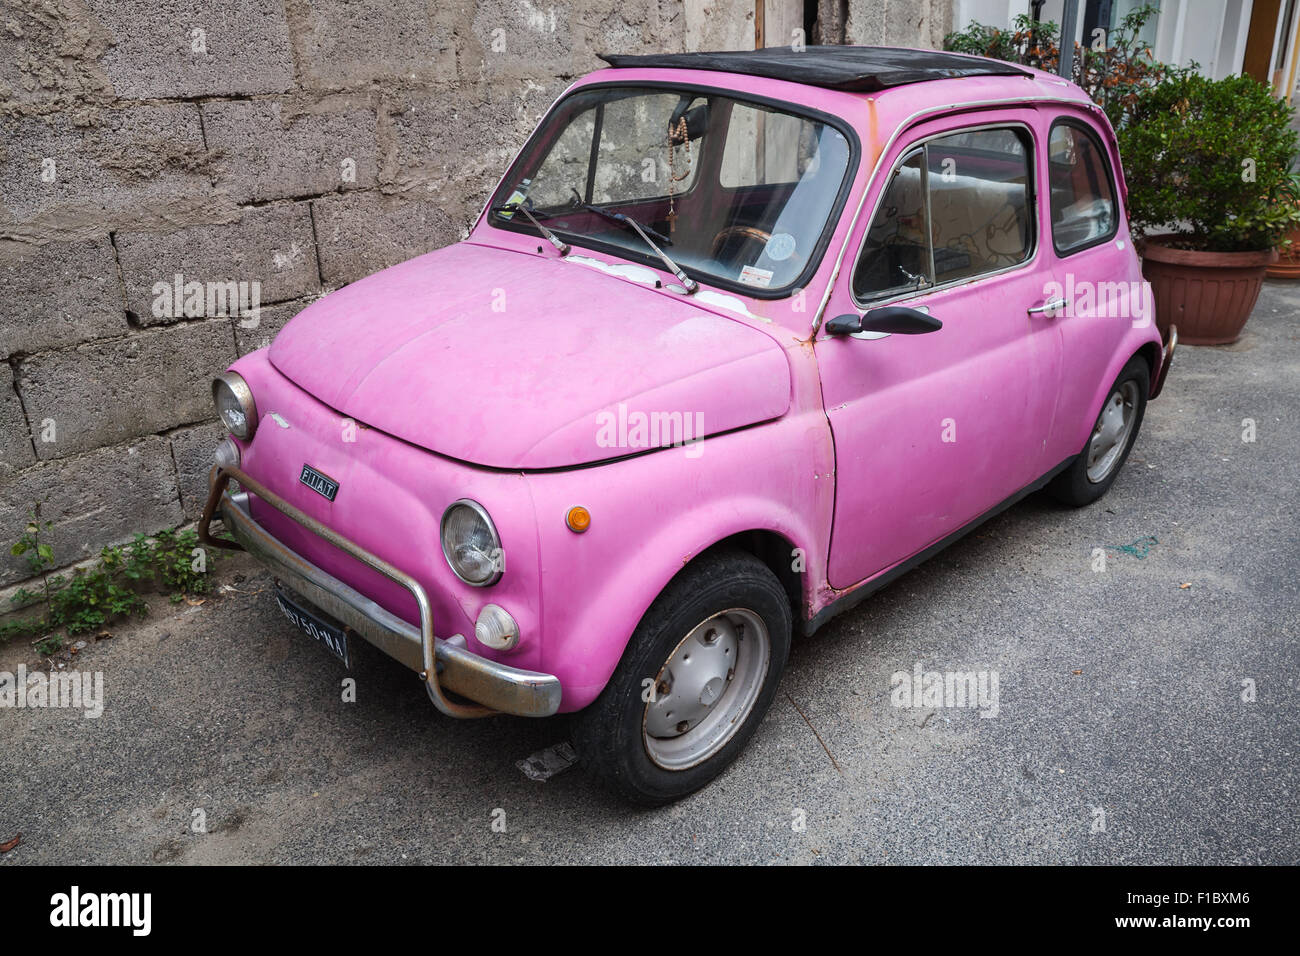 Lacco Ameno, Italy - August 15, 2015: Old pink Fiat Nuova 500 city car produced by the Italian manufacturer Fiat between 1957 an Stock Photo